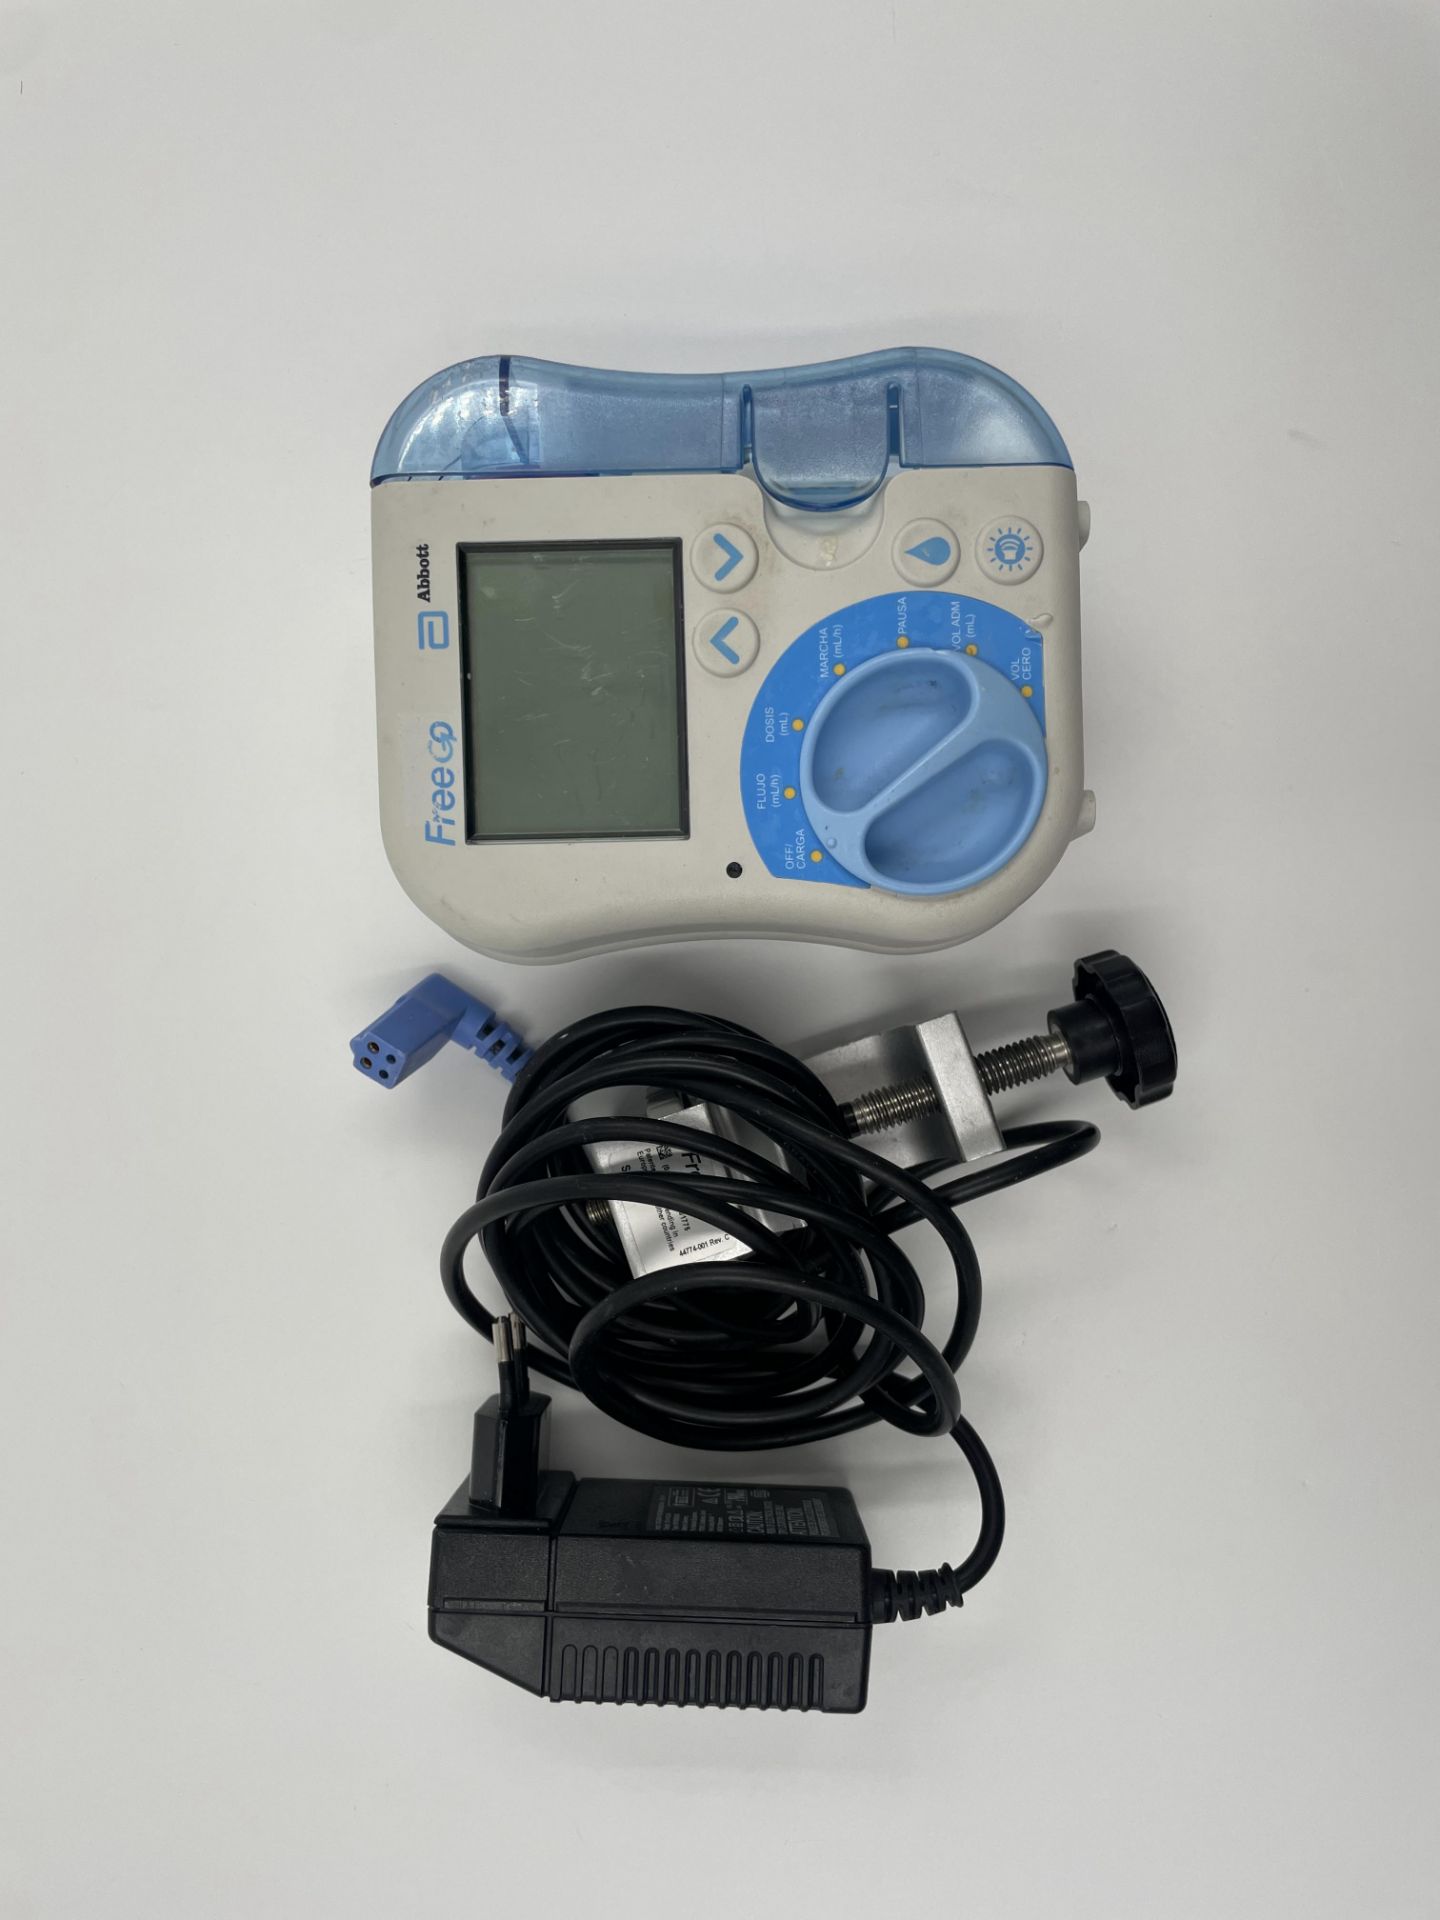 A pre-owned Abbott FreeGo Nutrition Pump (Untested, sold as seen).